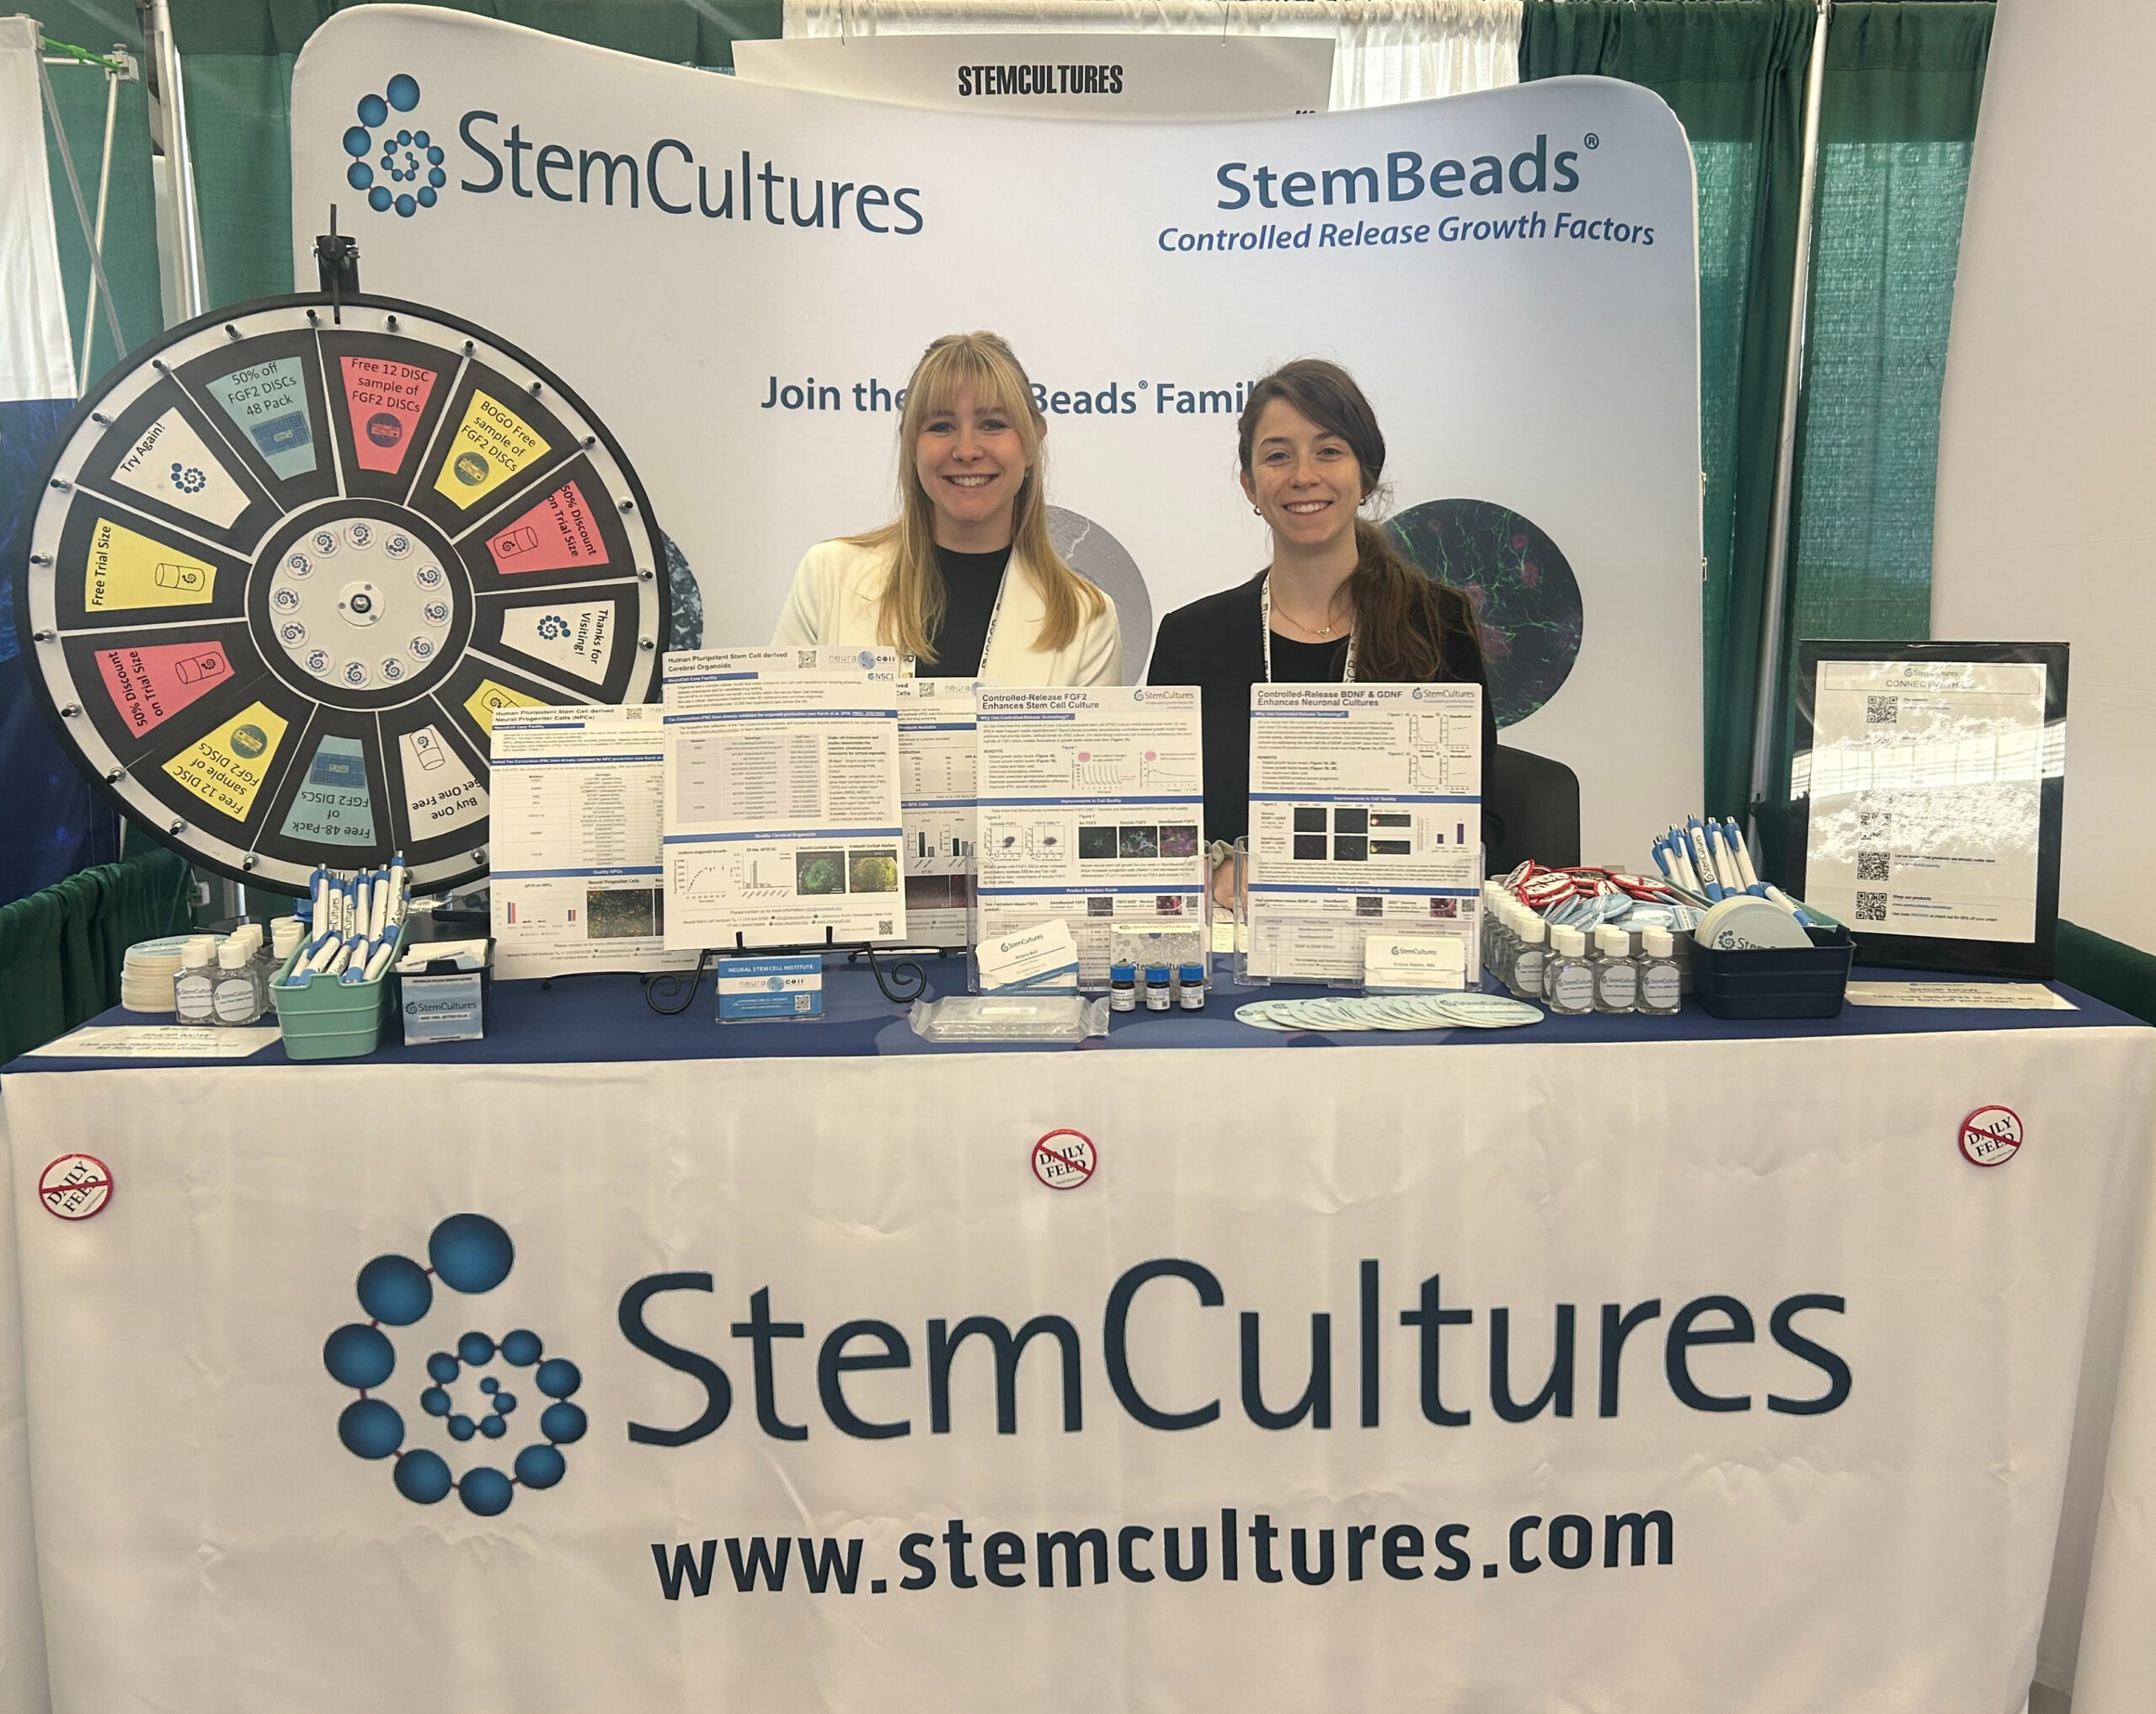 The StemCultures booth at ISSCR23